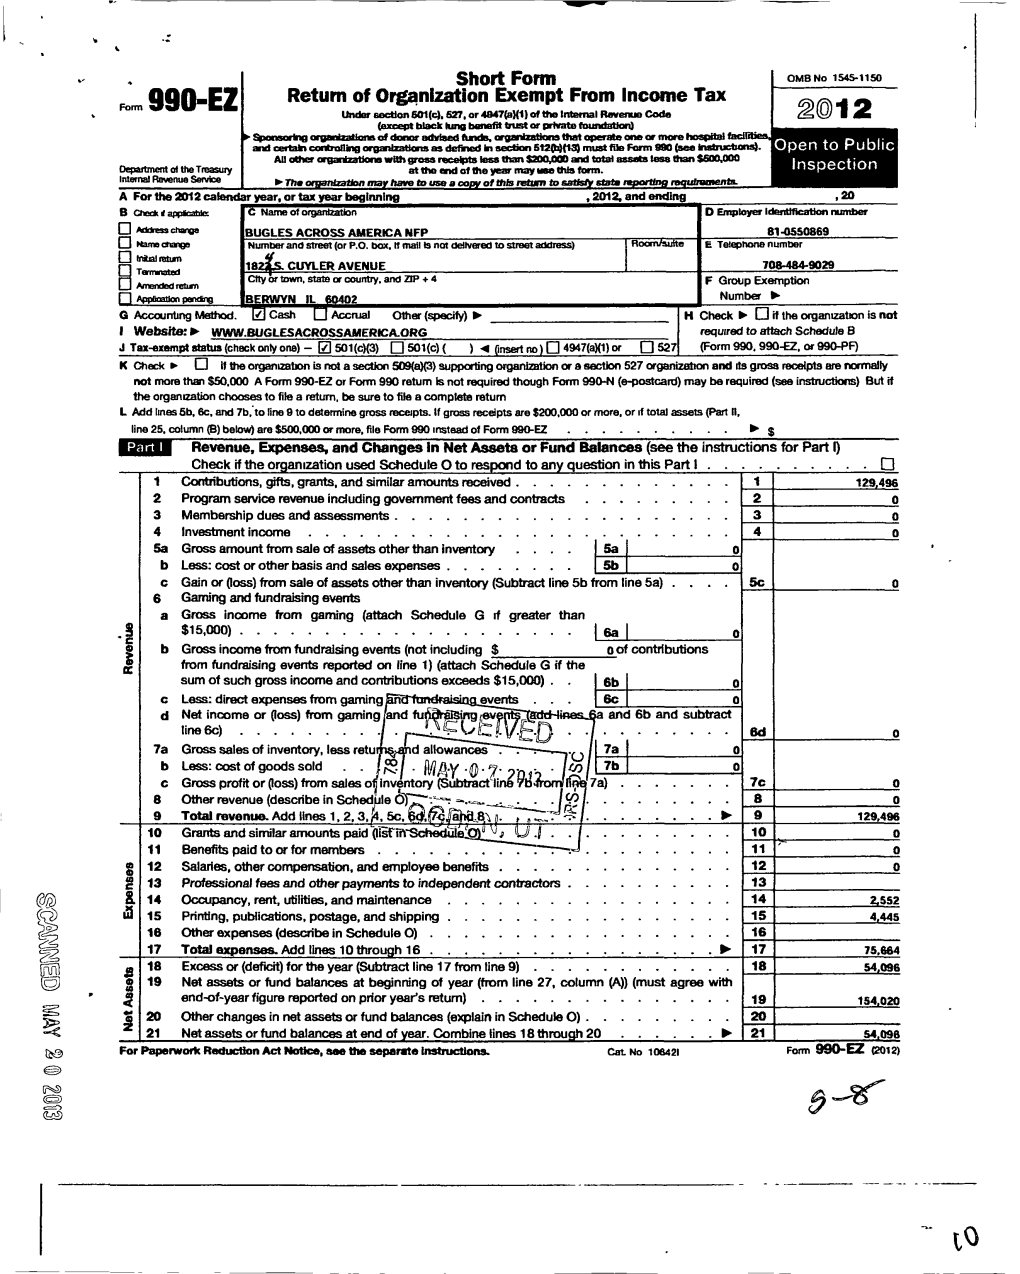 Fn 990-EZ Return of Organization Exempt from Income Tax ^^ Under Section 601(C)